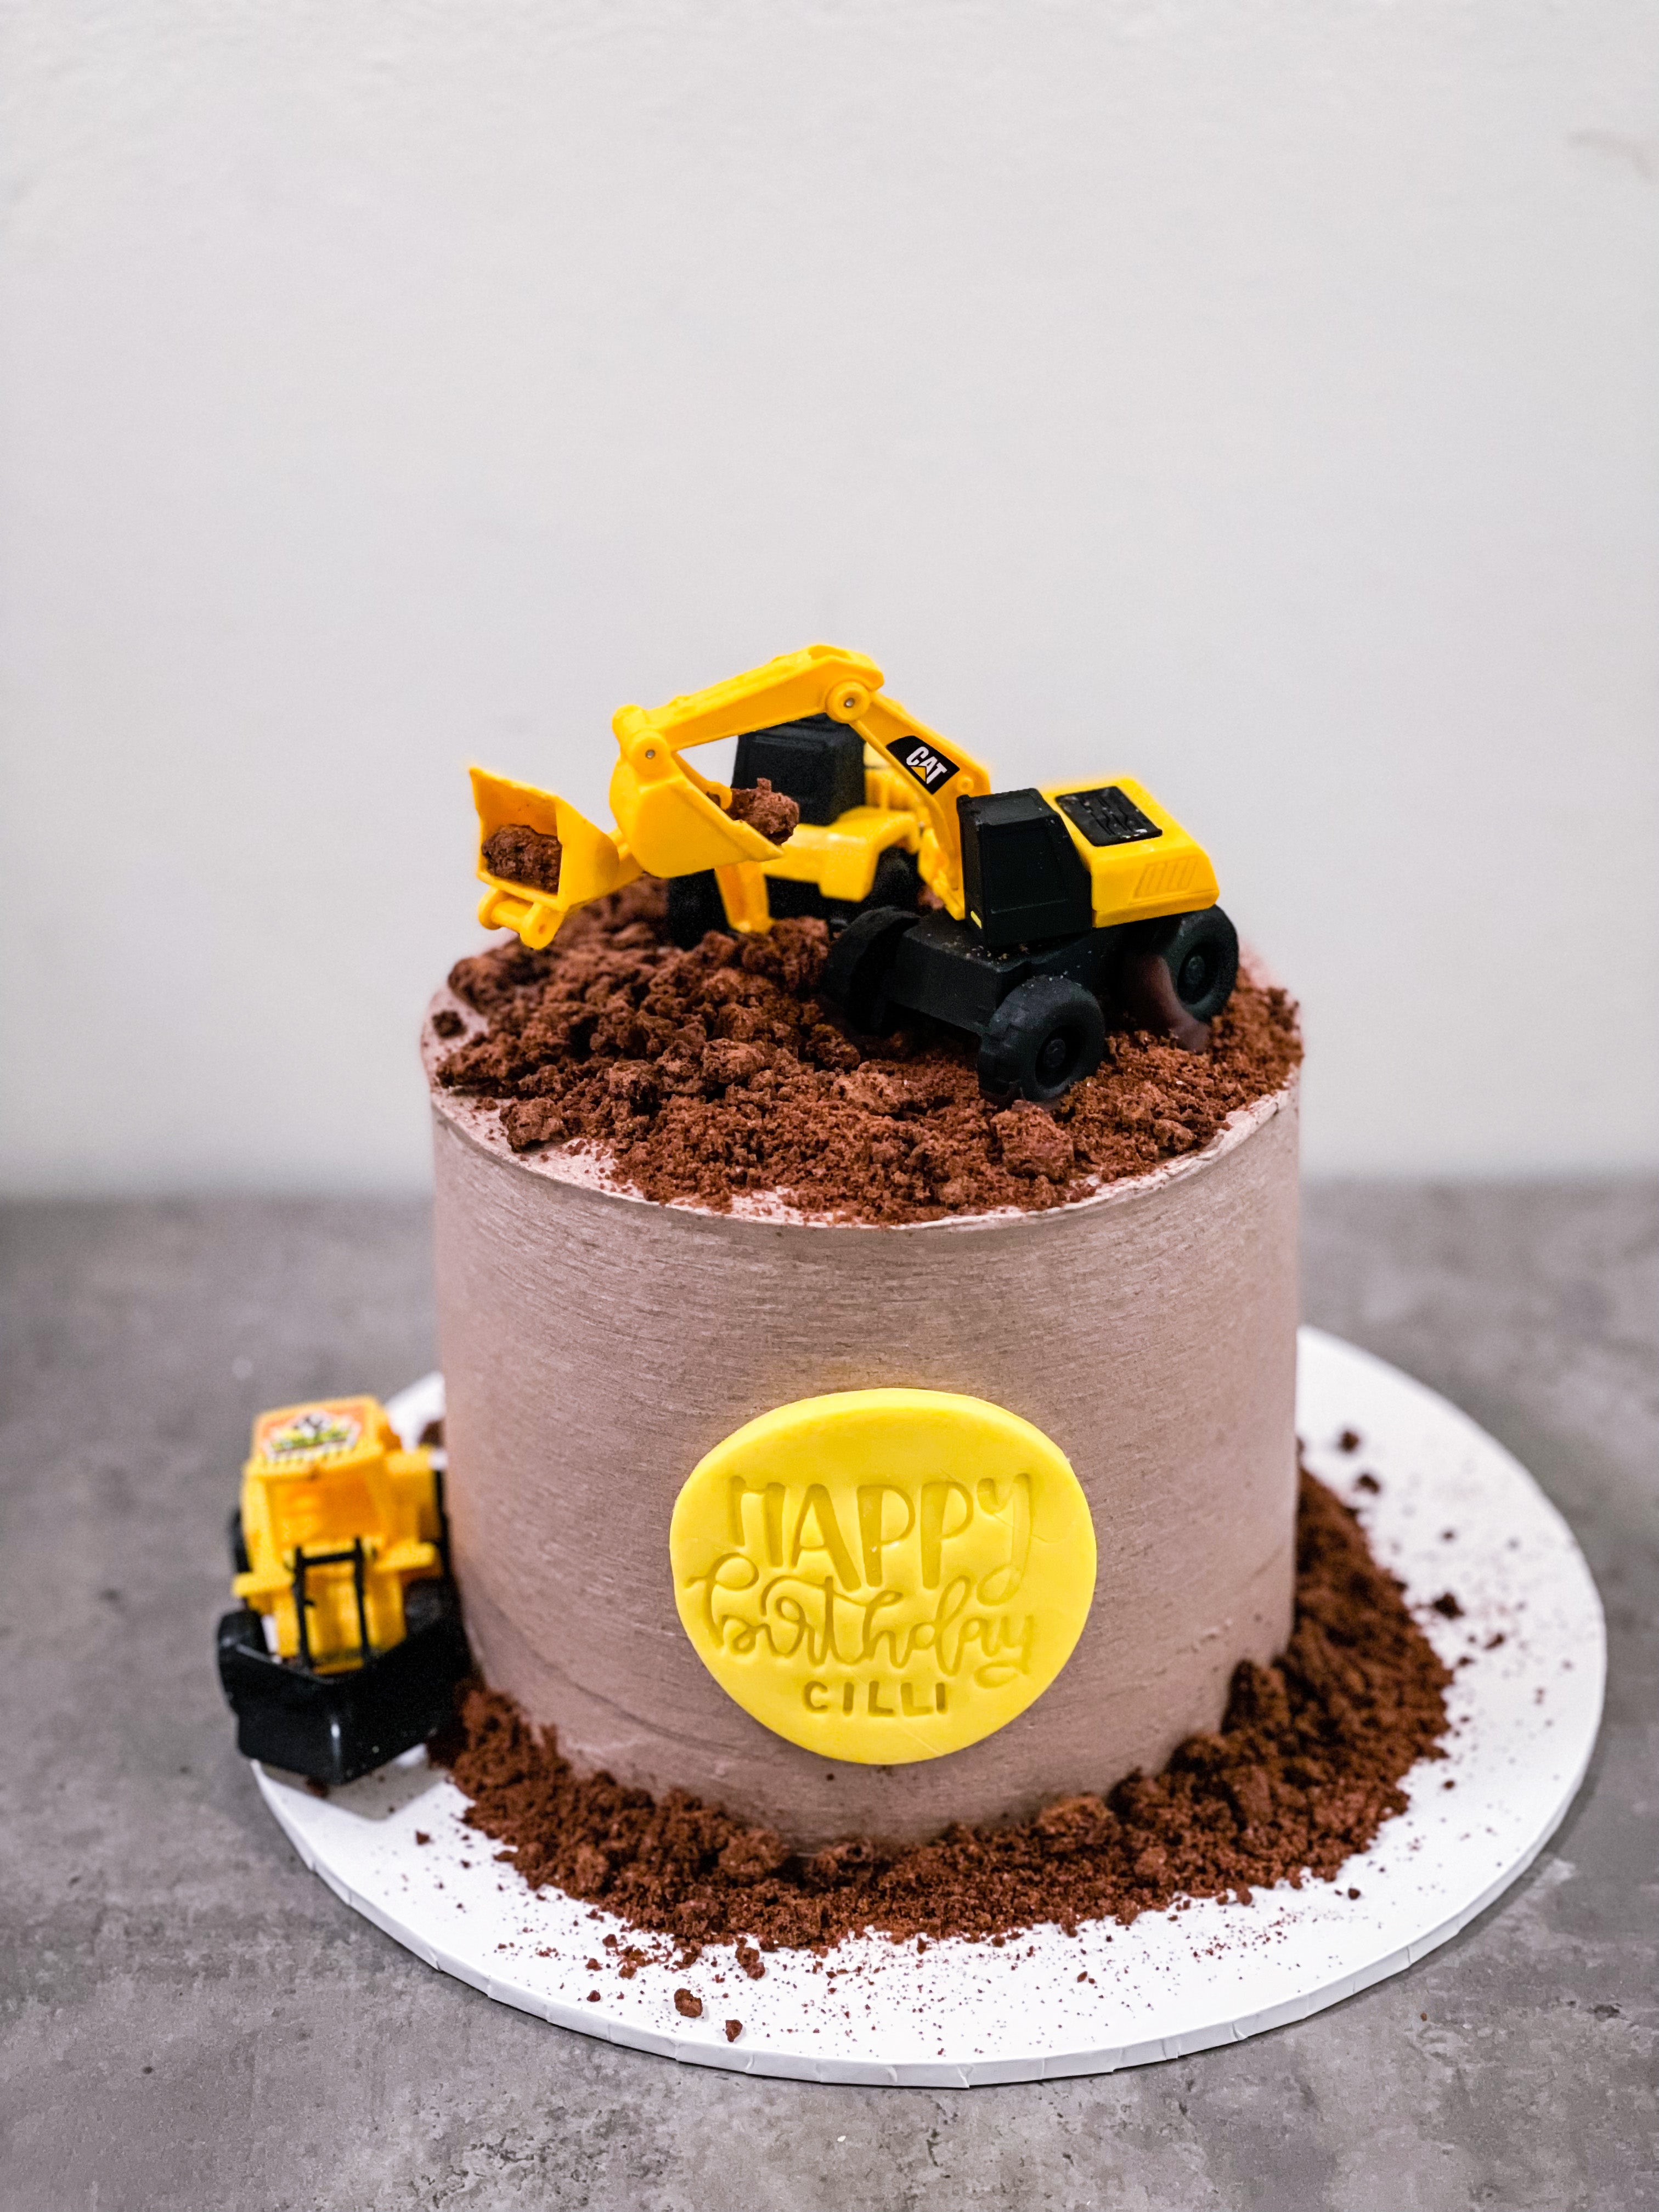 How to Make a Monster Truck Cake -The easiest cake you'll ever make!